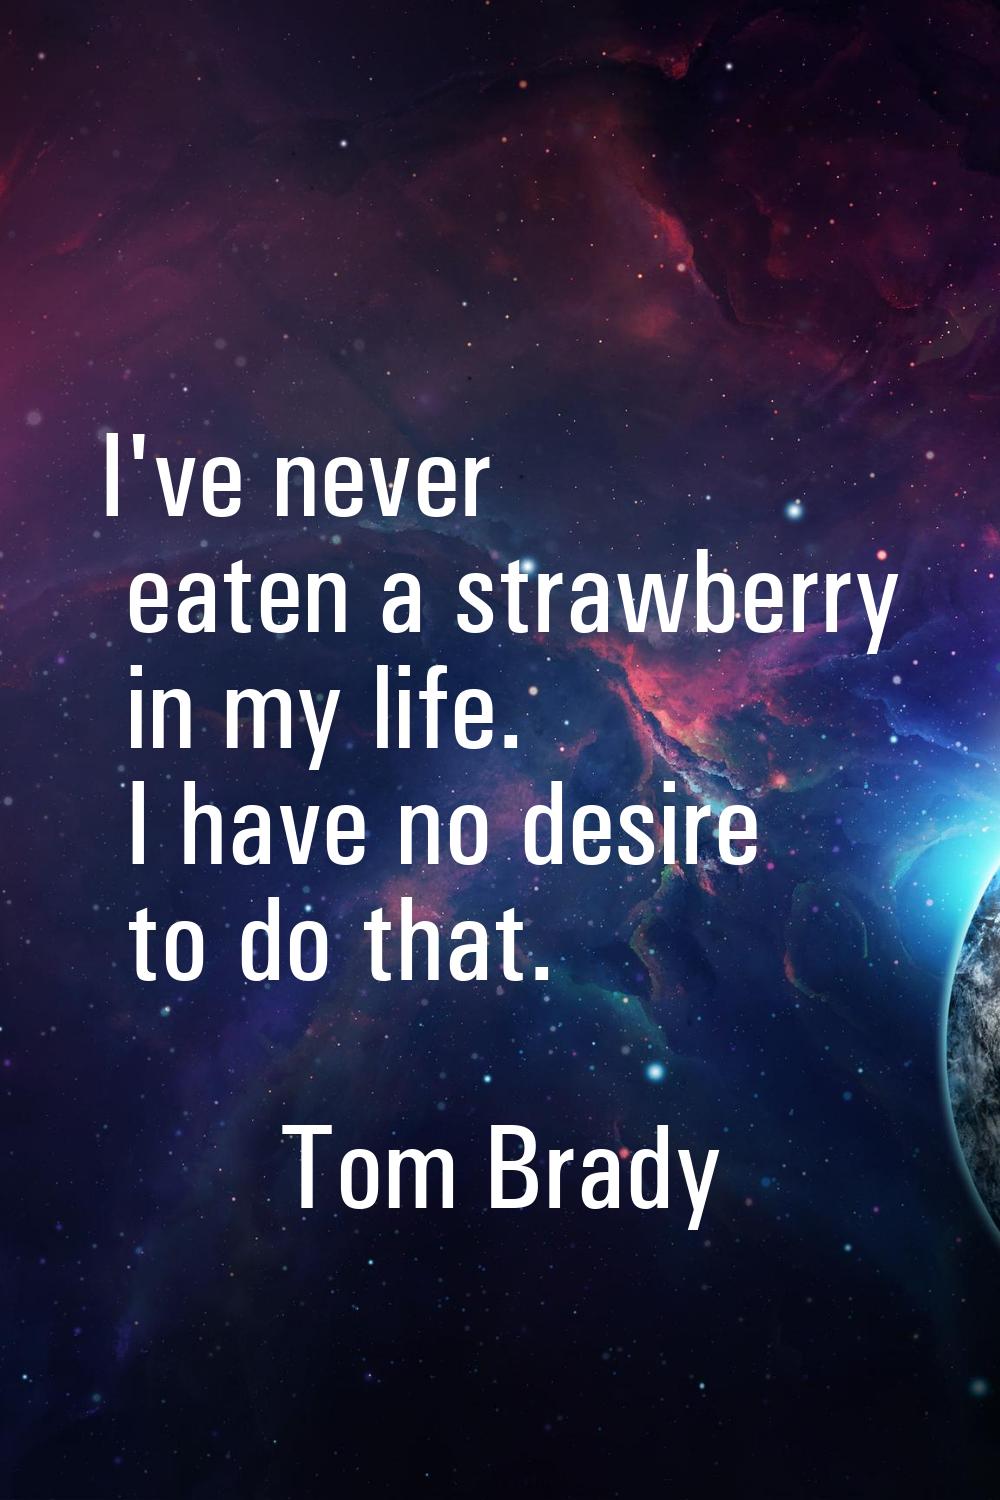 I've never eaten a strawberry in my life. I have no desire to do that.